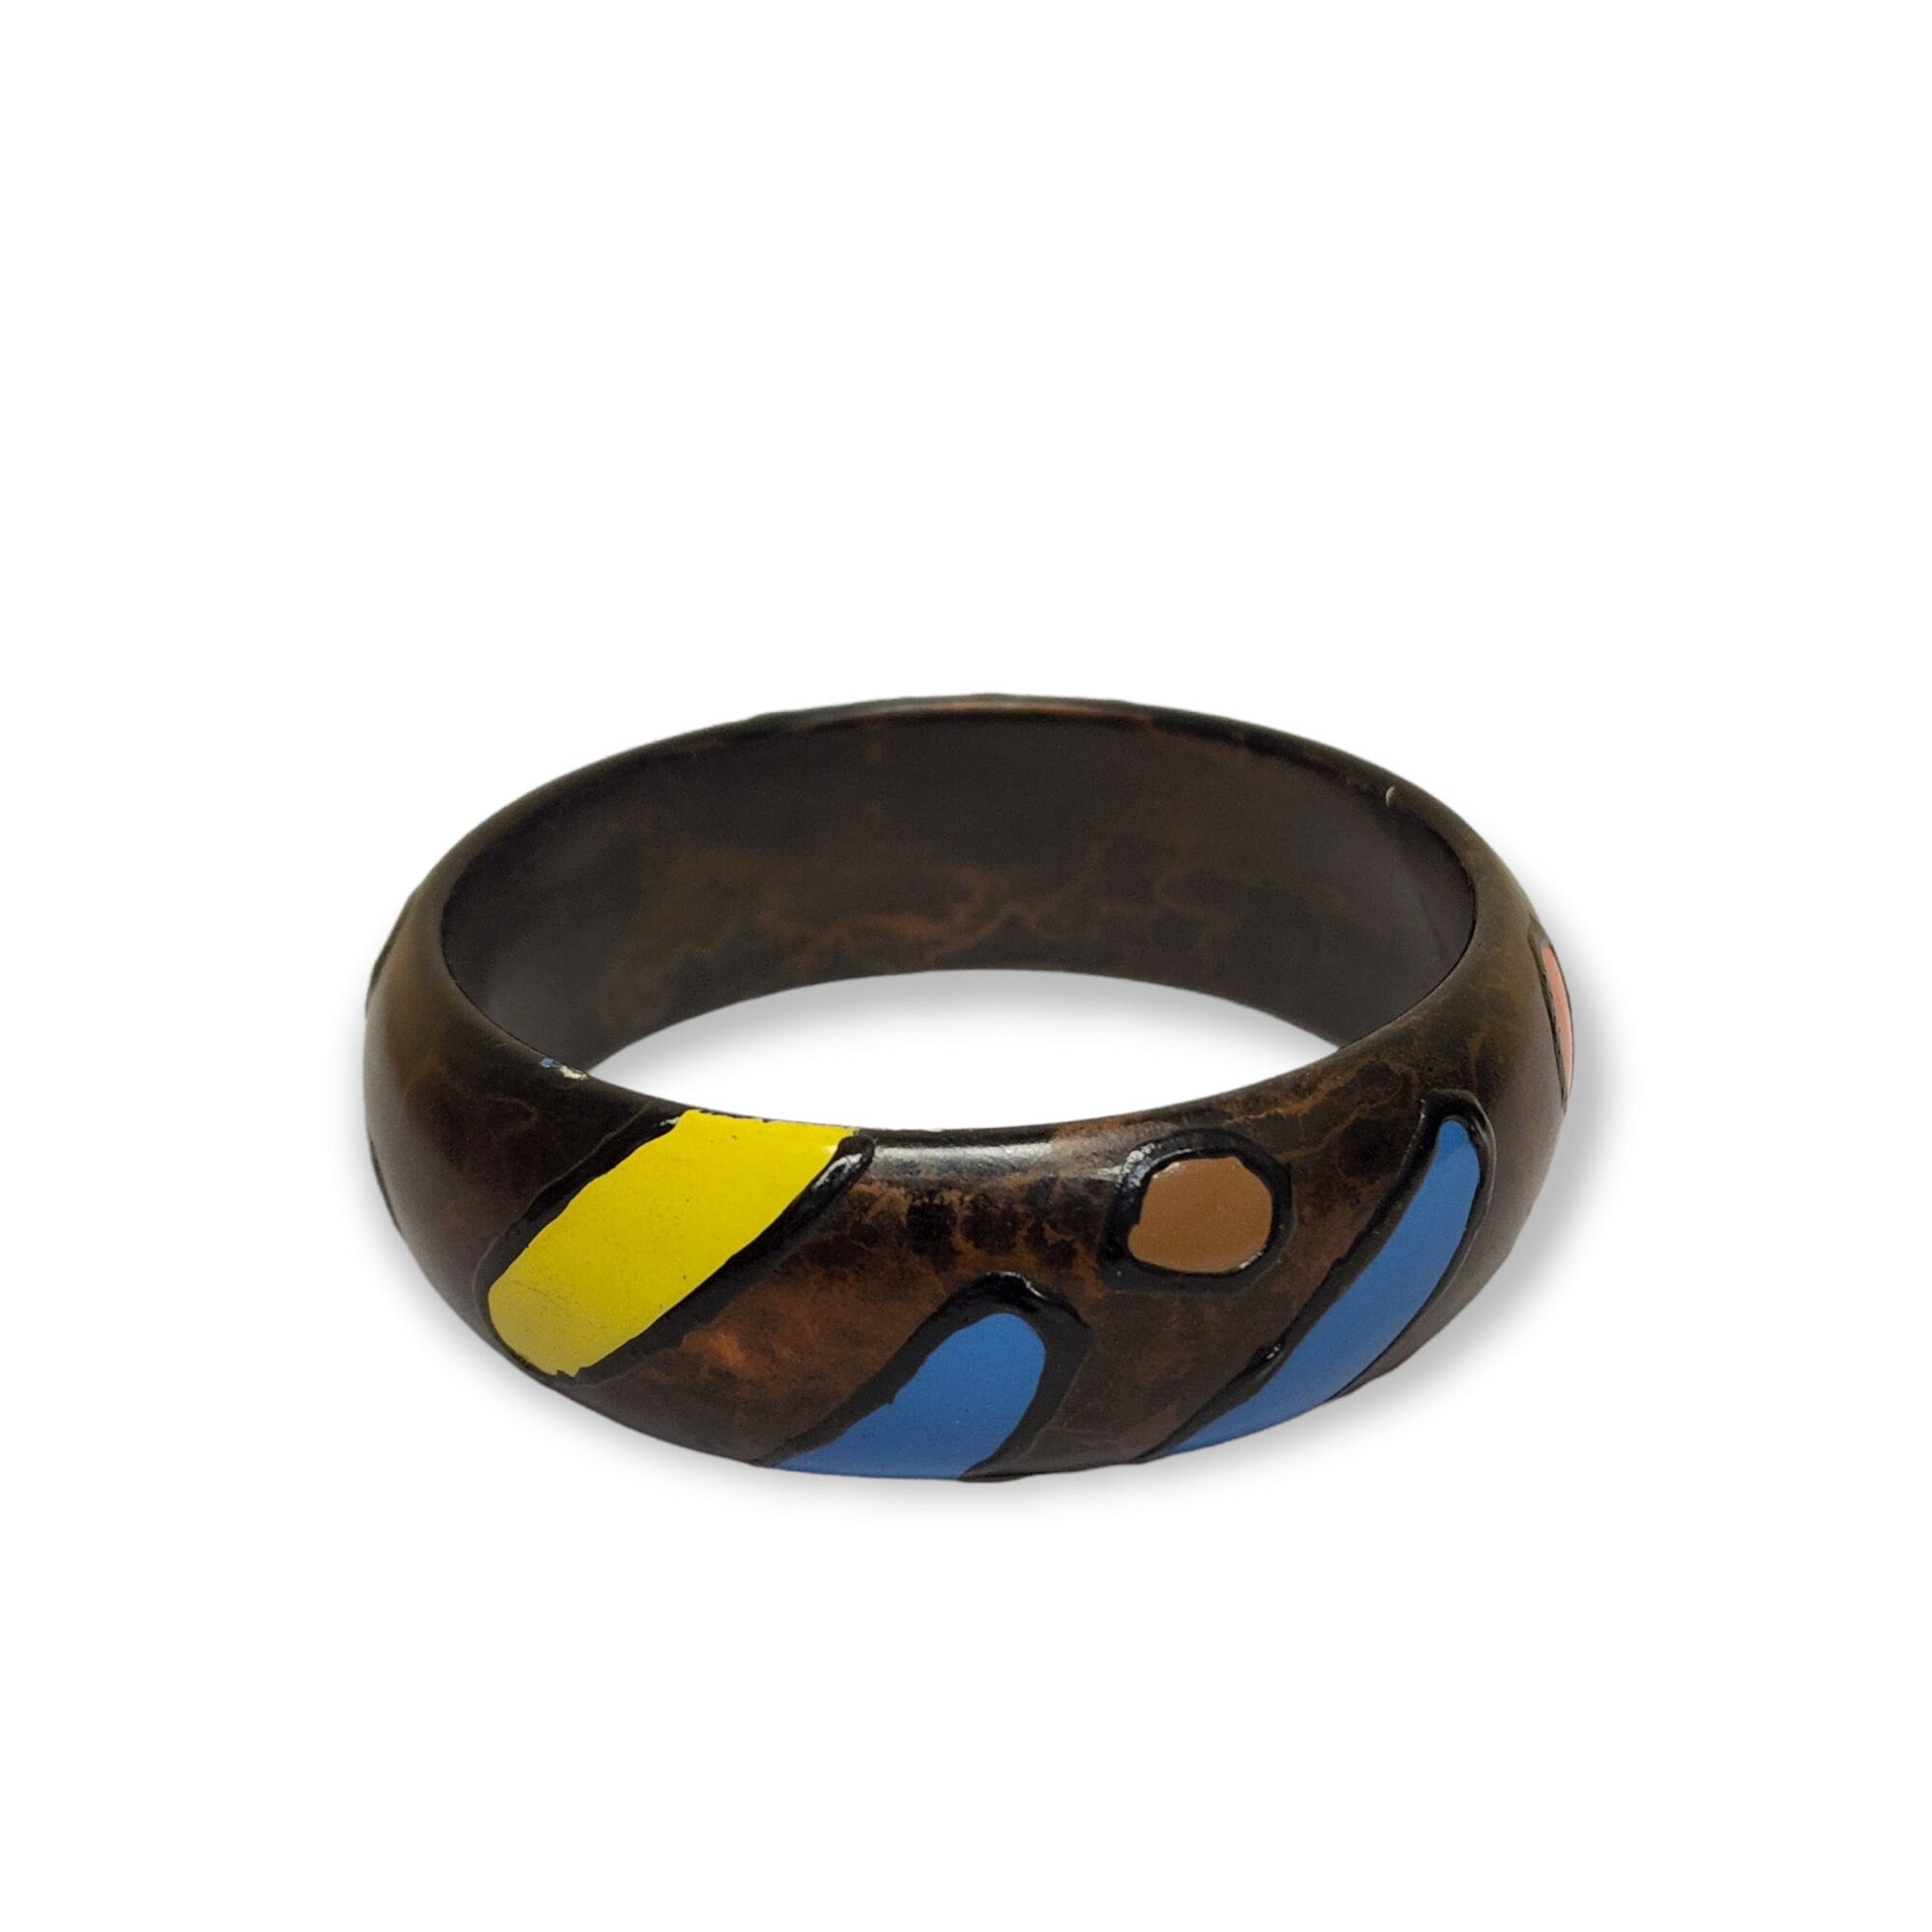 Cool Lacquered Abstracted Painted Wood Vintage Bangle Bracelet Fits up to 7"